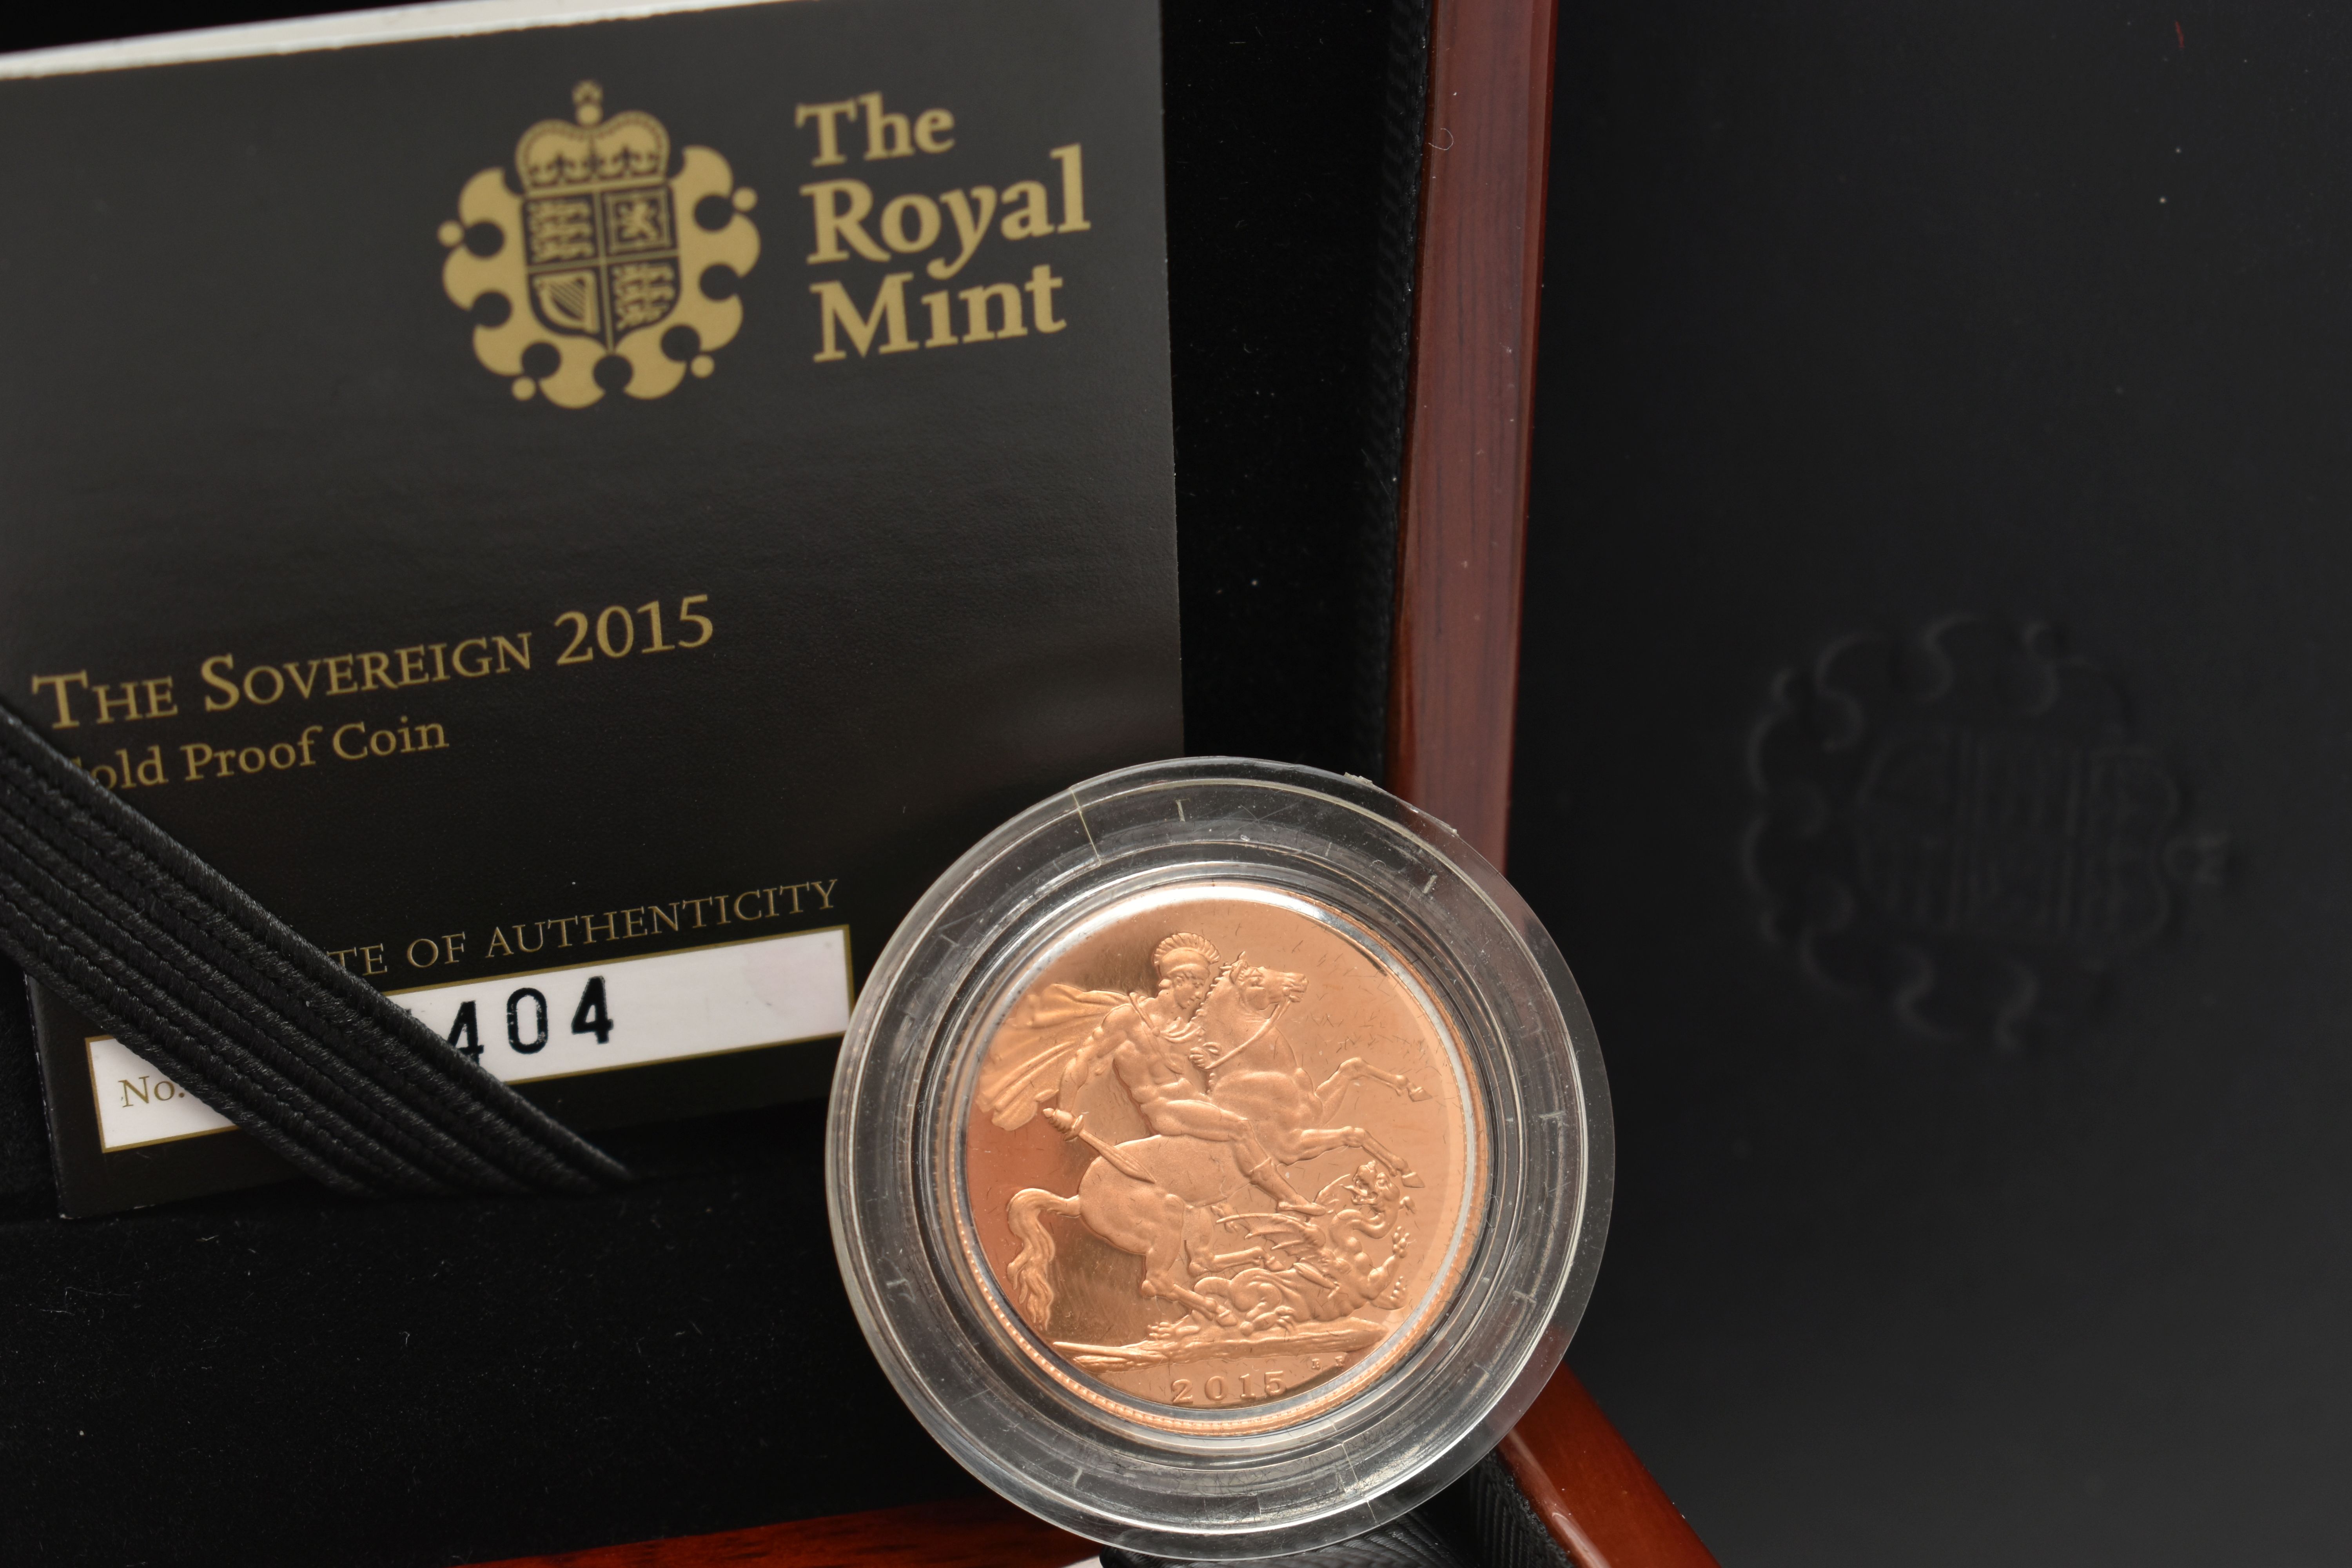 A BOXED ROYAL MINT FULL GOLD PROOF SOVEREIGN COIN 2015, .916.7 fine, 7.98 gram, 22.05mm, box and